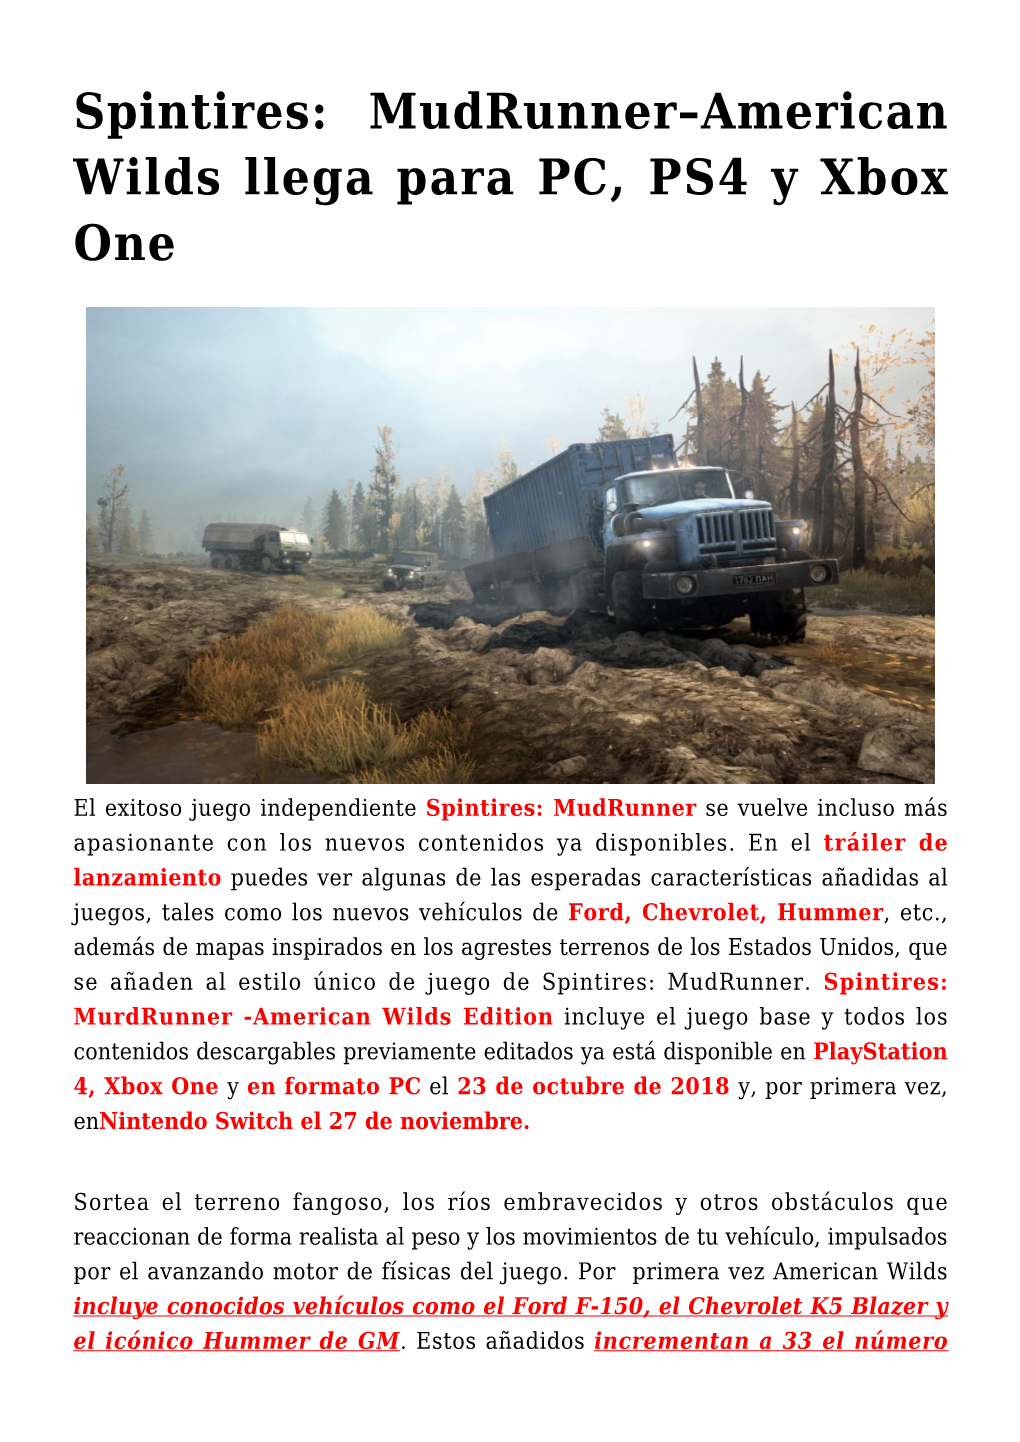 Spintires: Mudrunner–American Wilds Llega Para PC, PS4 Y Xbox One